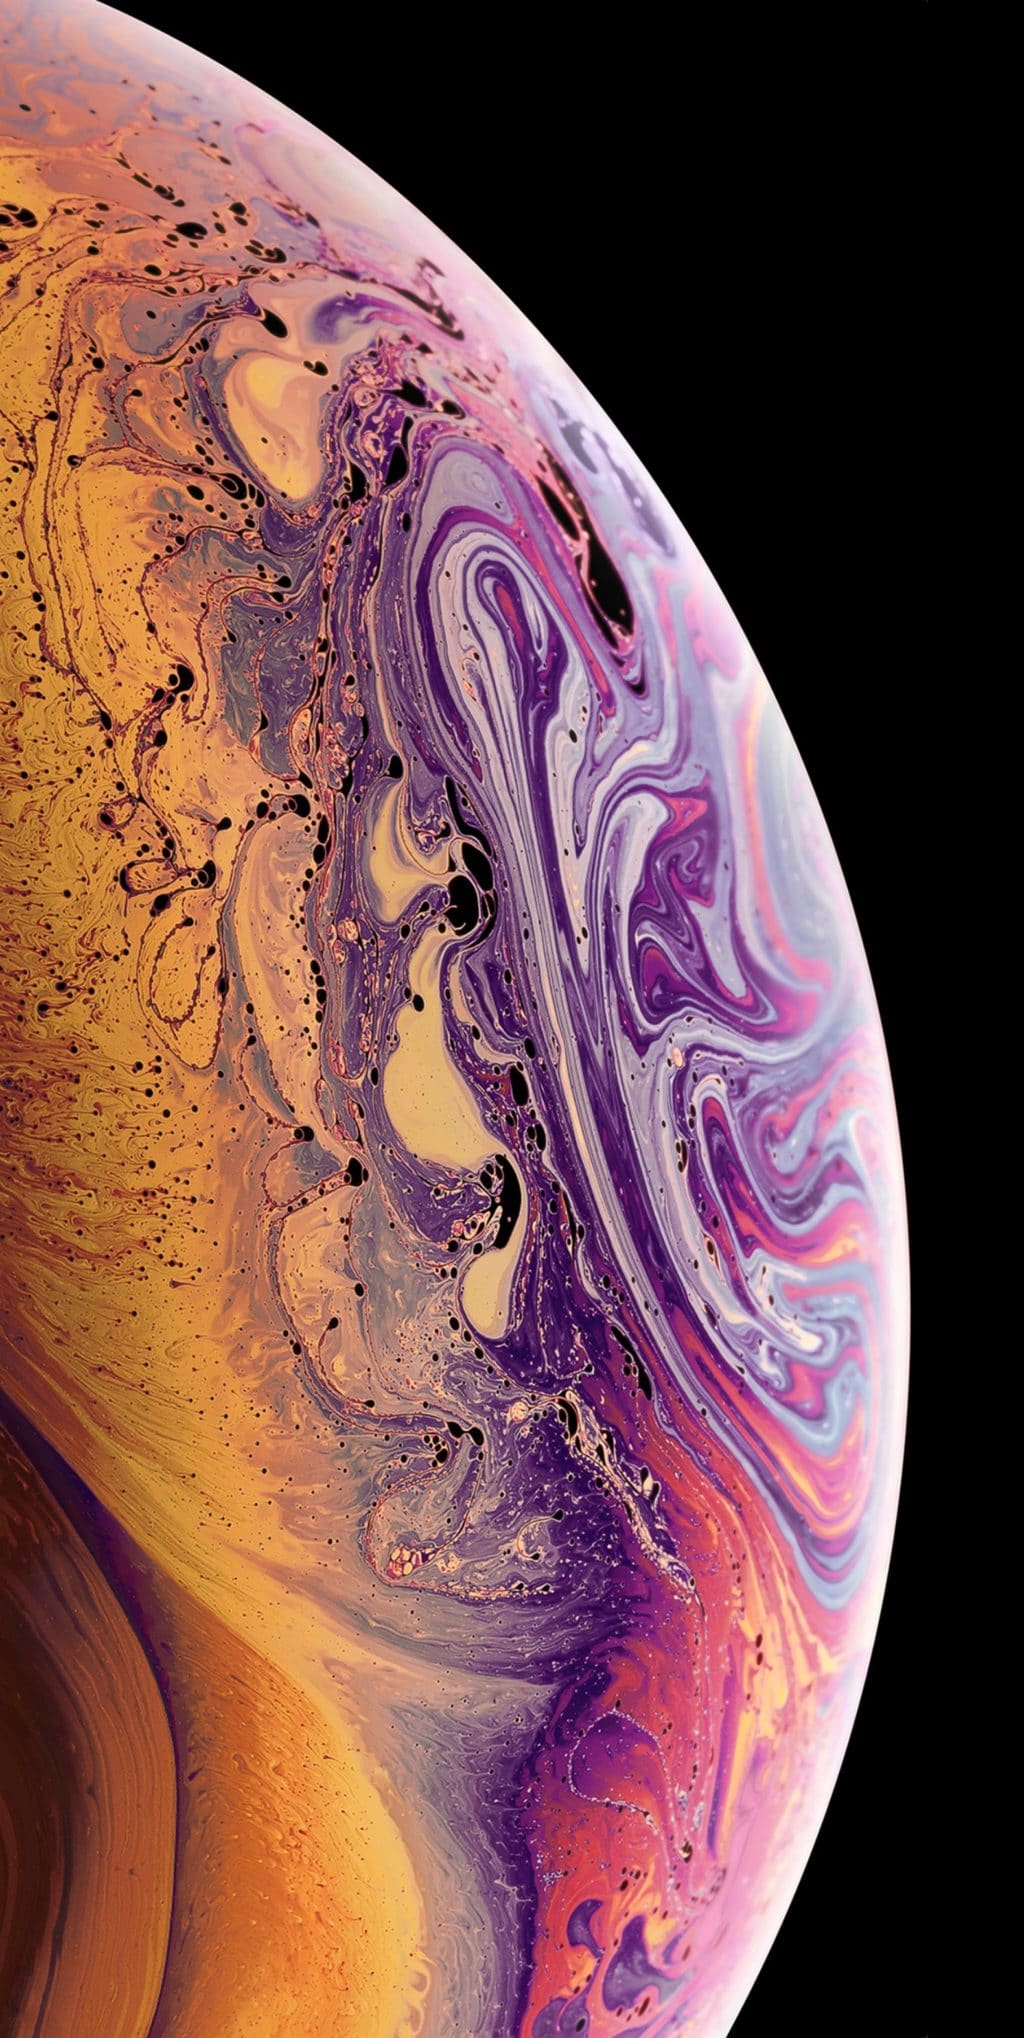 iPhone Xs Planet 3D Wallpapers - Wallpaper Cave